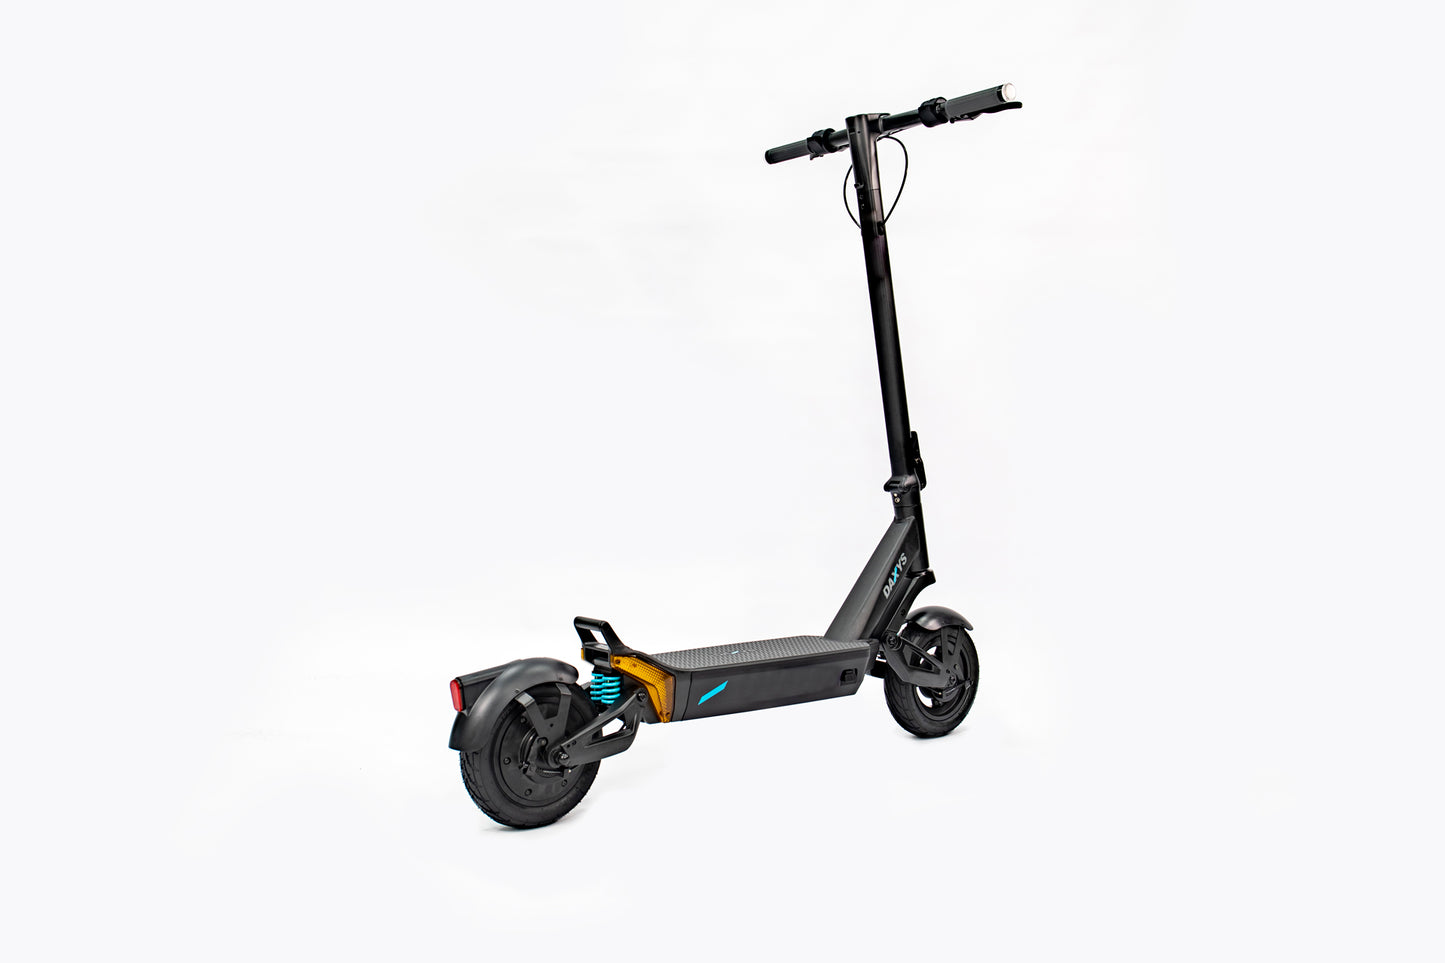 Daxys Bandicoot Electric Scooter